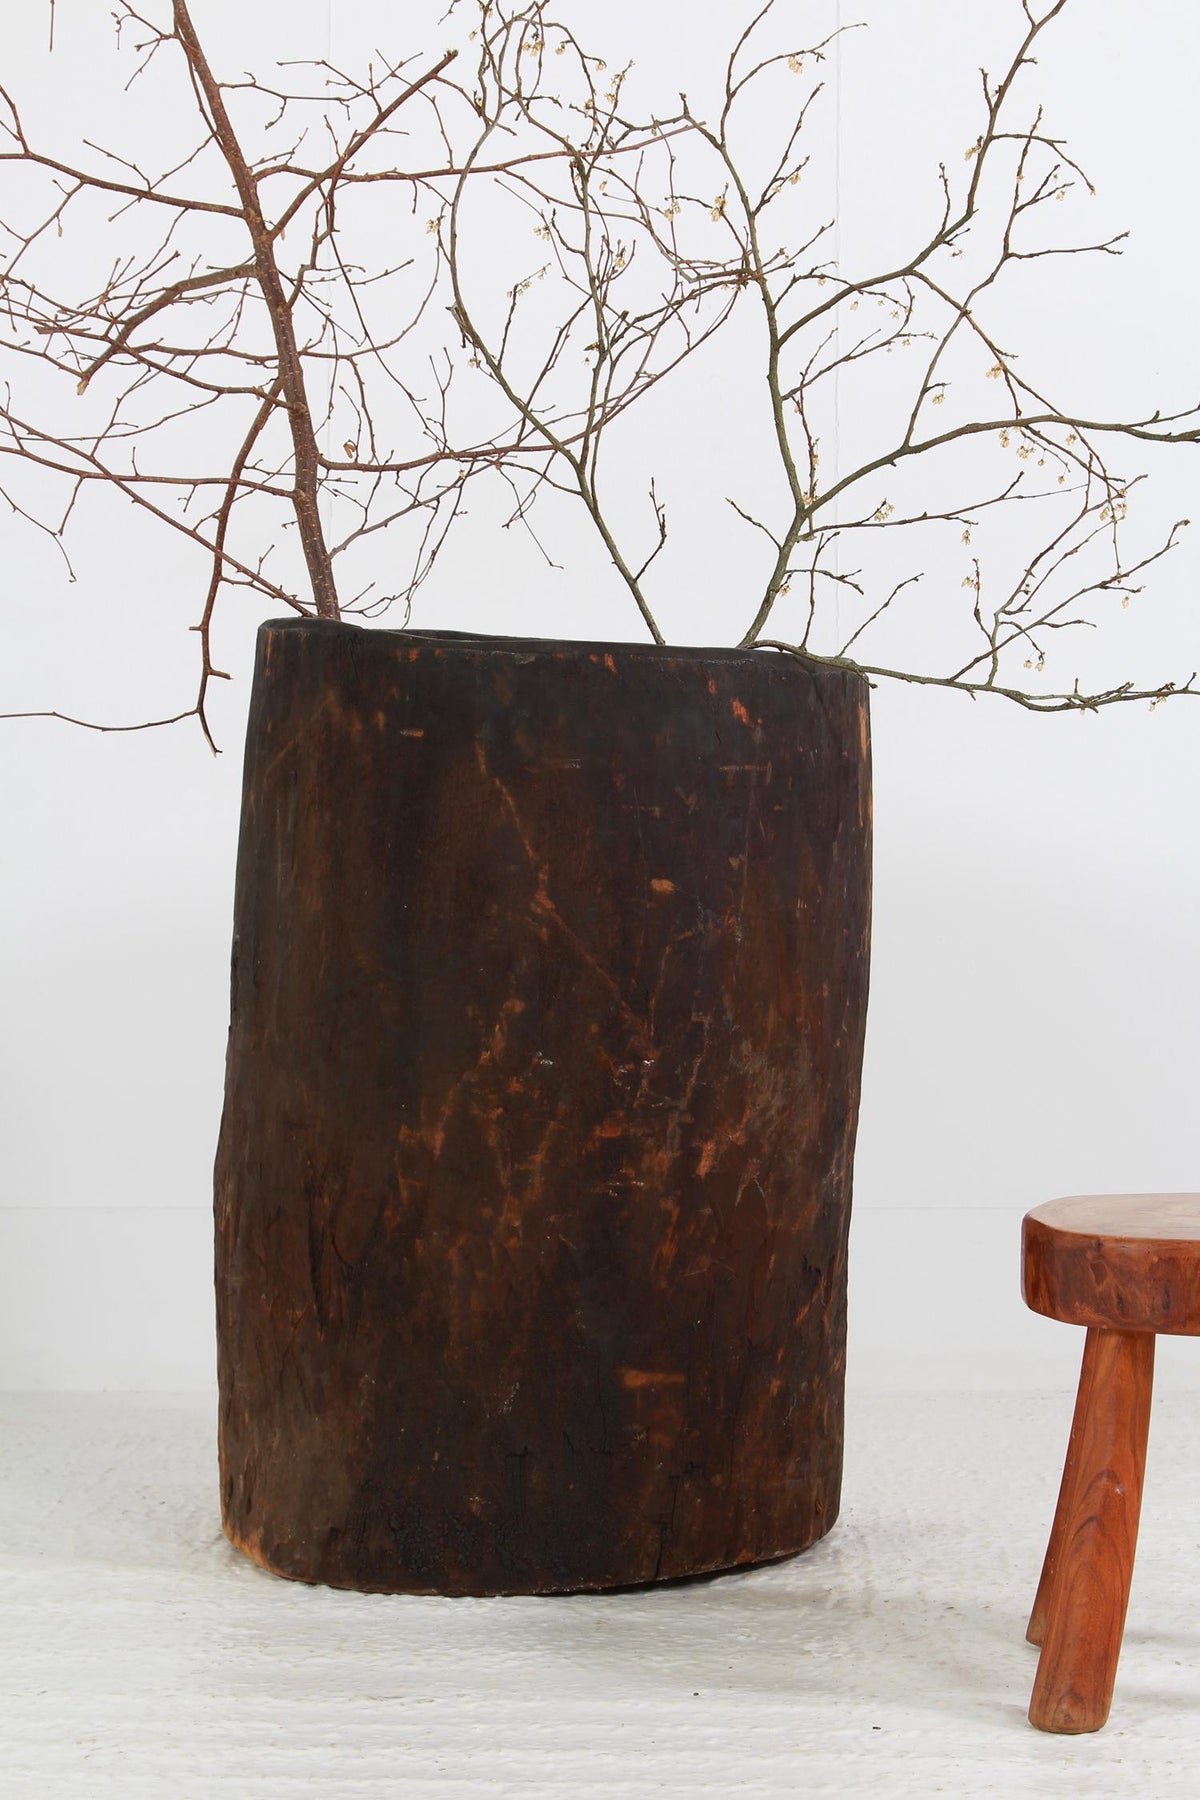 Unique XL Wood Container Made from Hollowed Out Tree Trunk